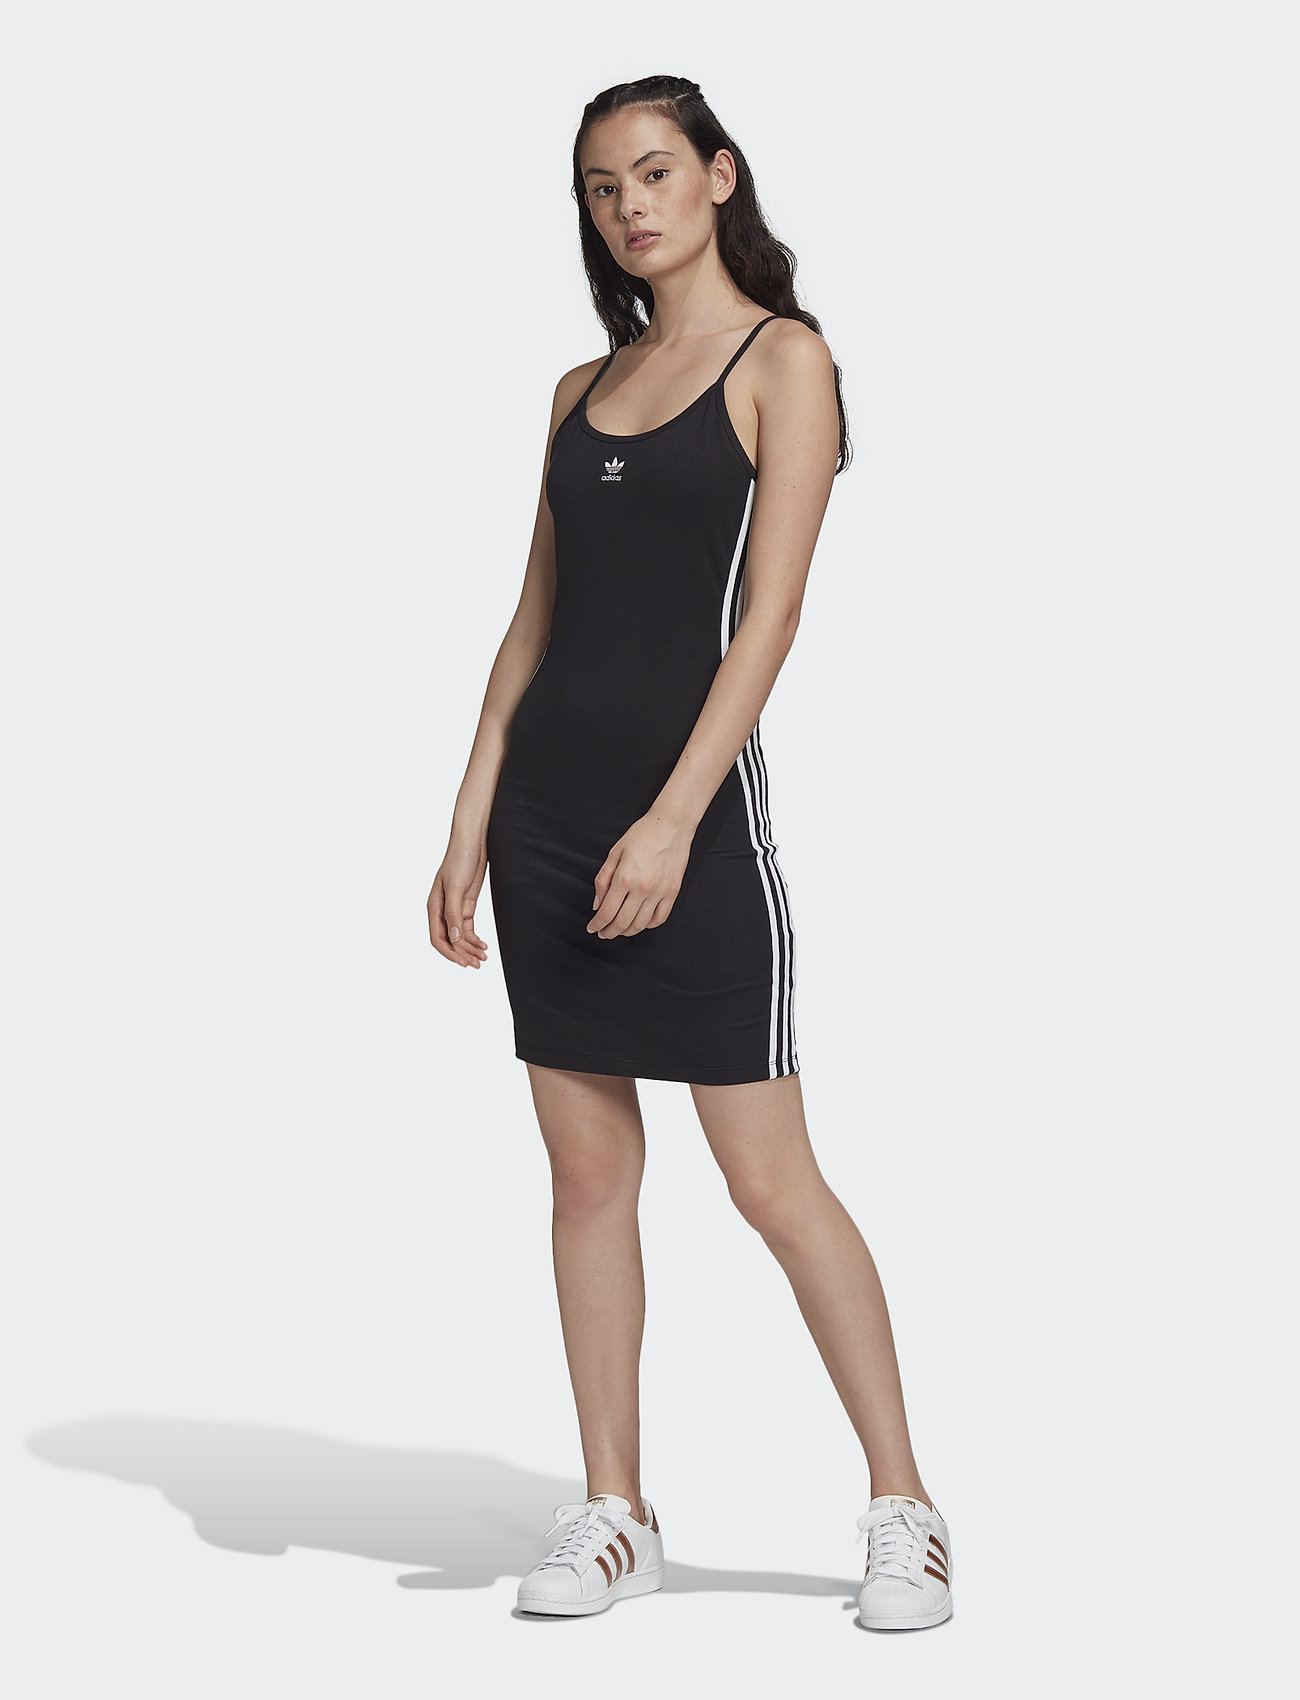 adidas dress outfit